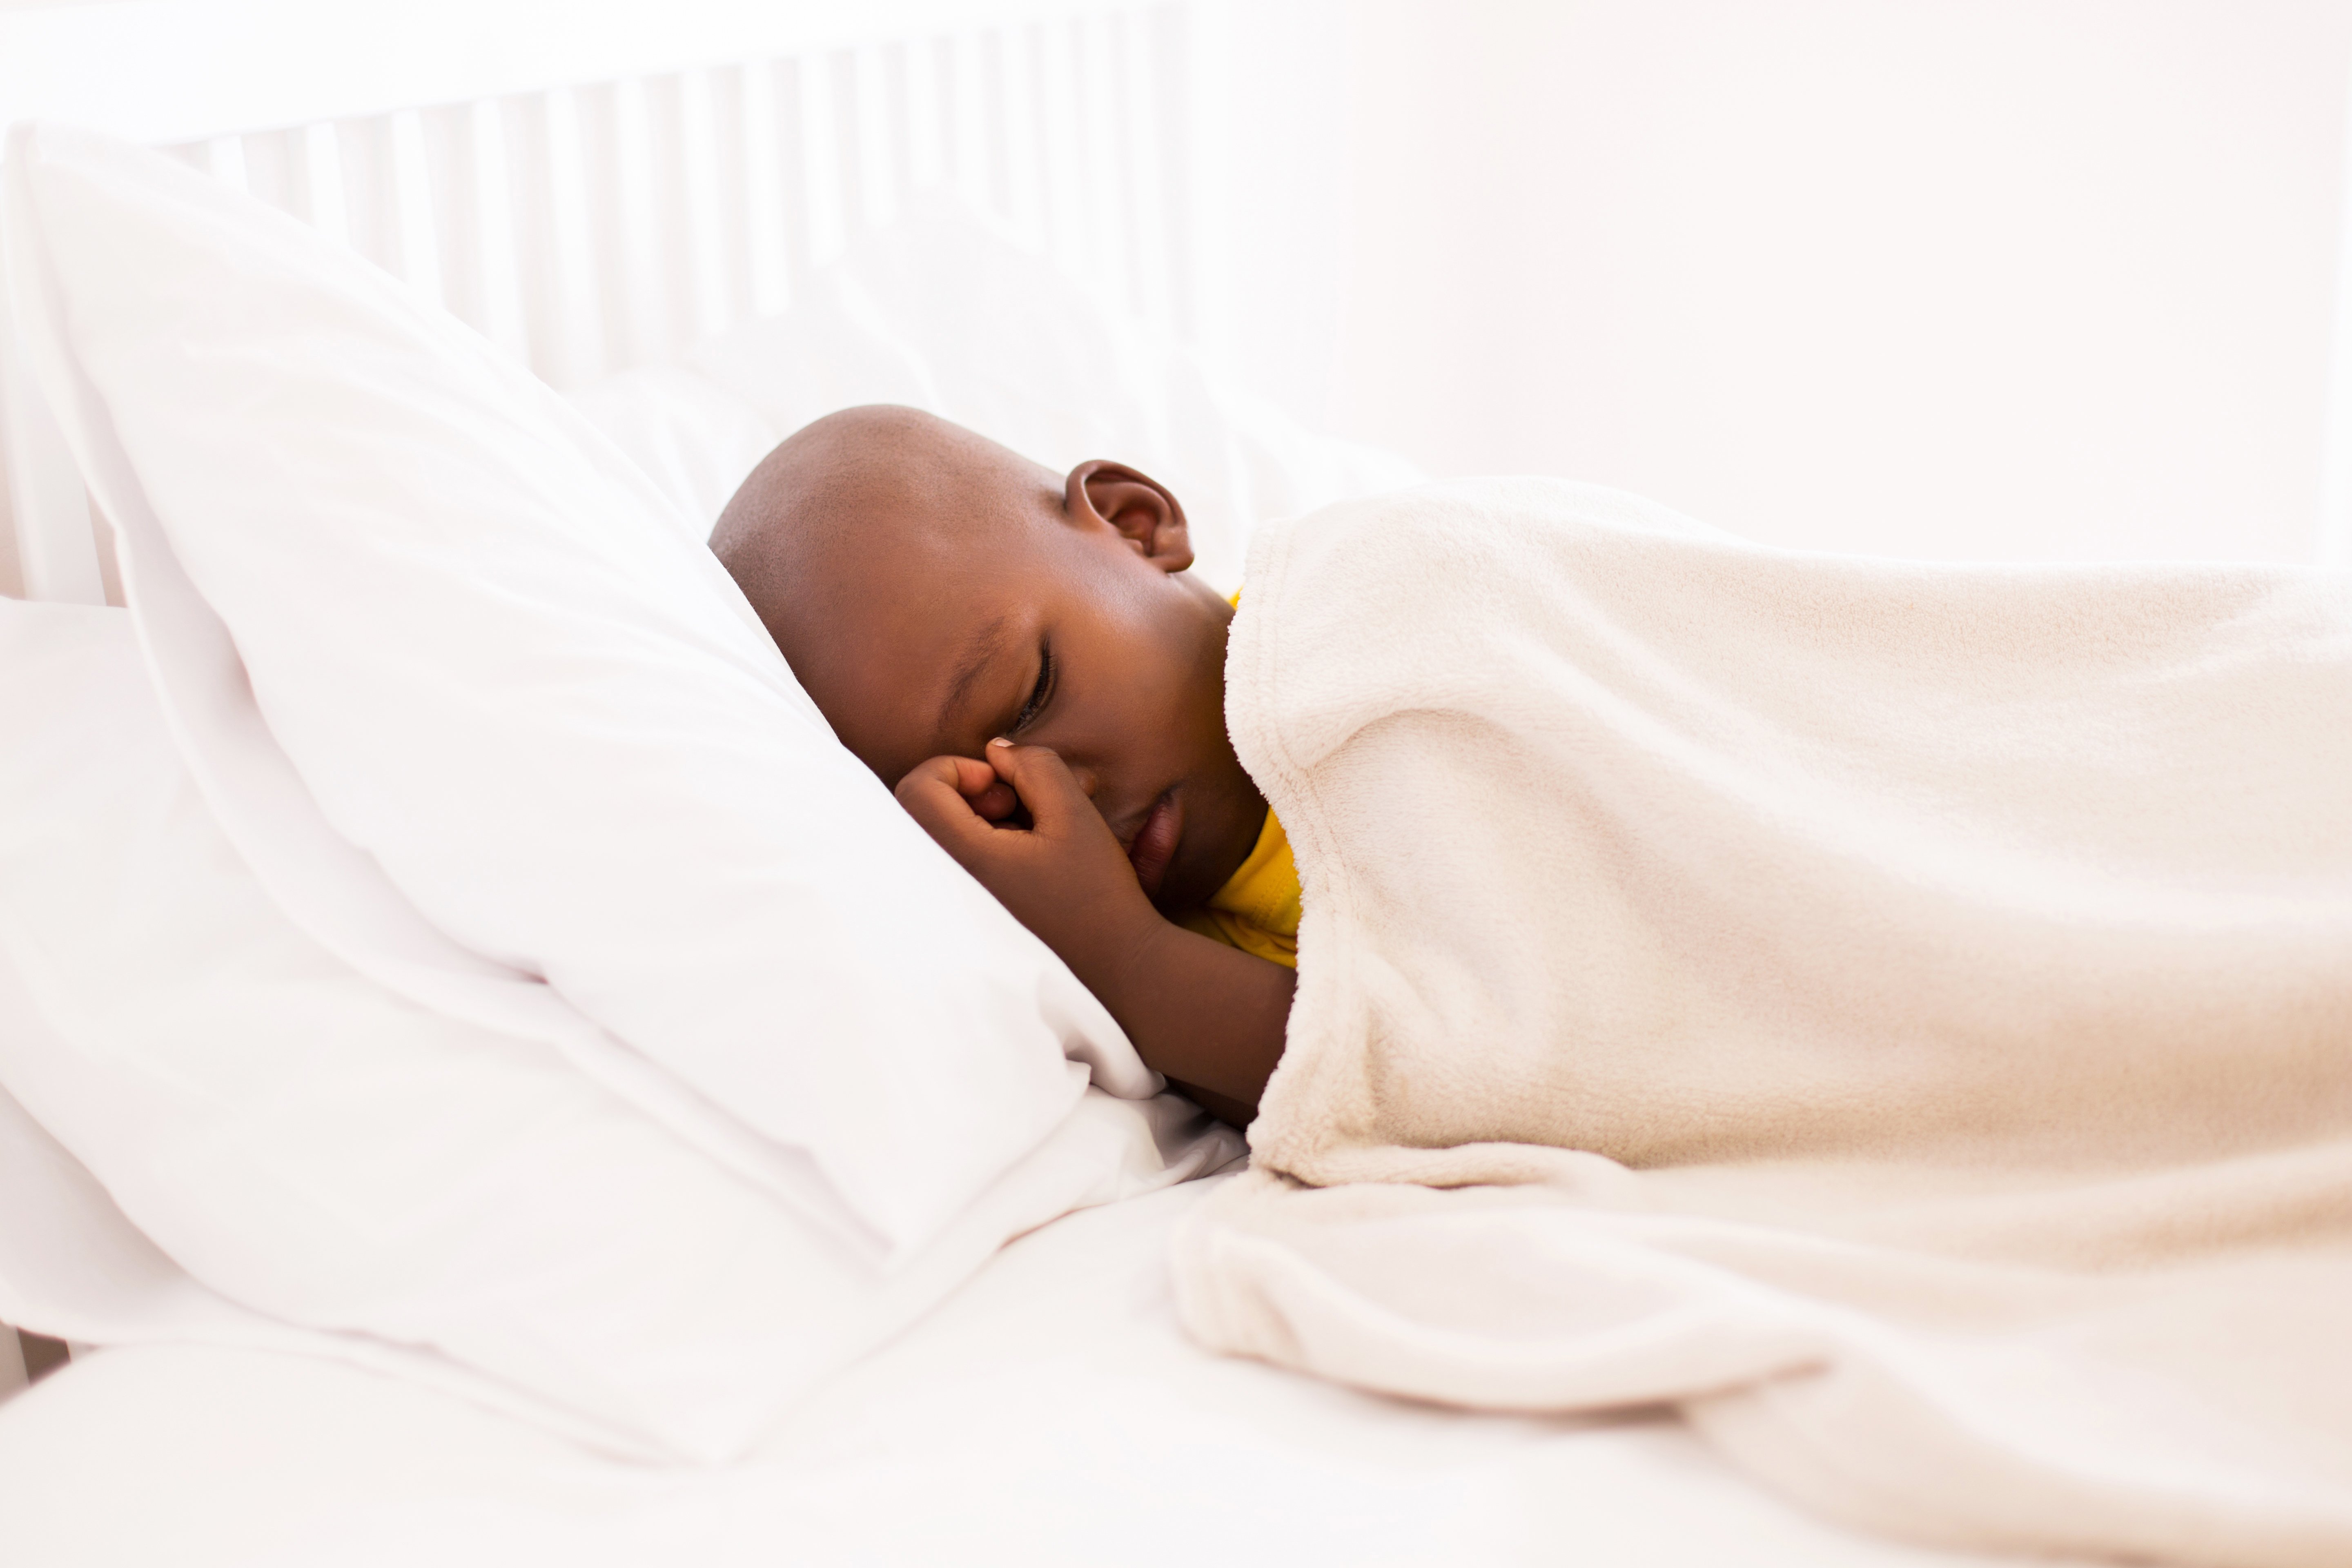 Umar would often cry himself to sleep at night but his adoptive parents didn't know what was wrong. | Source: Shutterstock